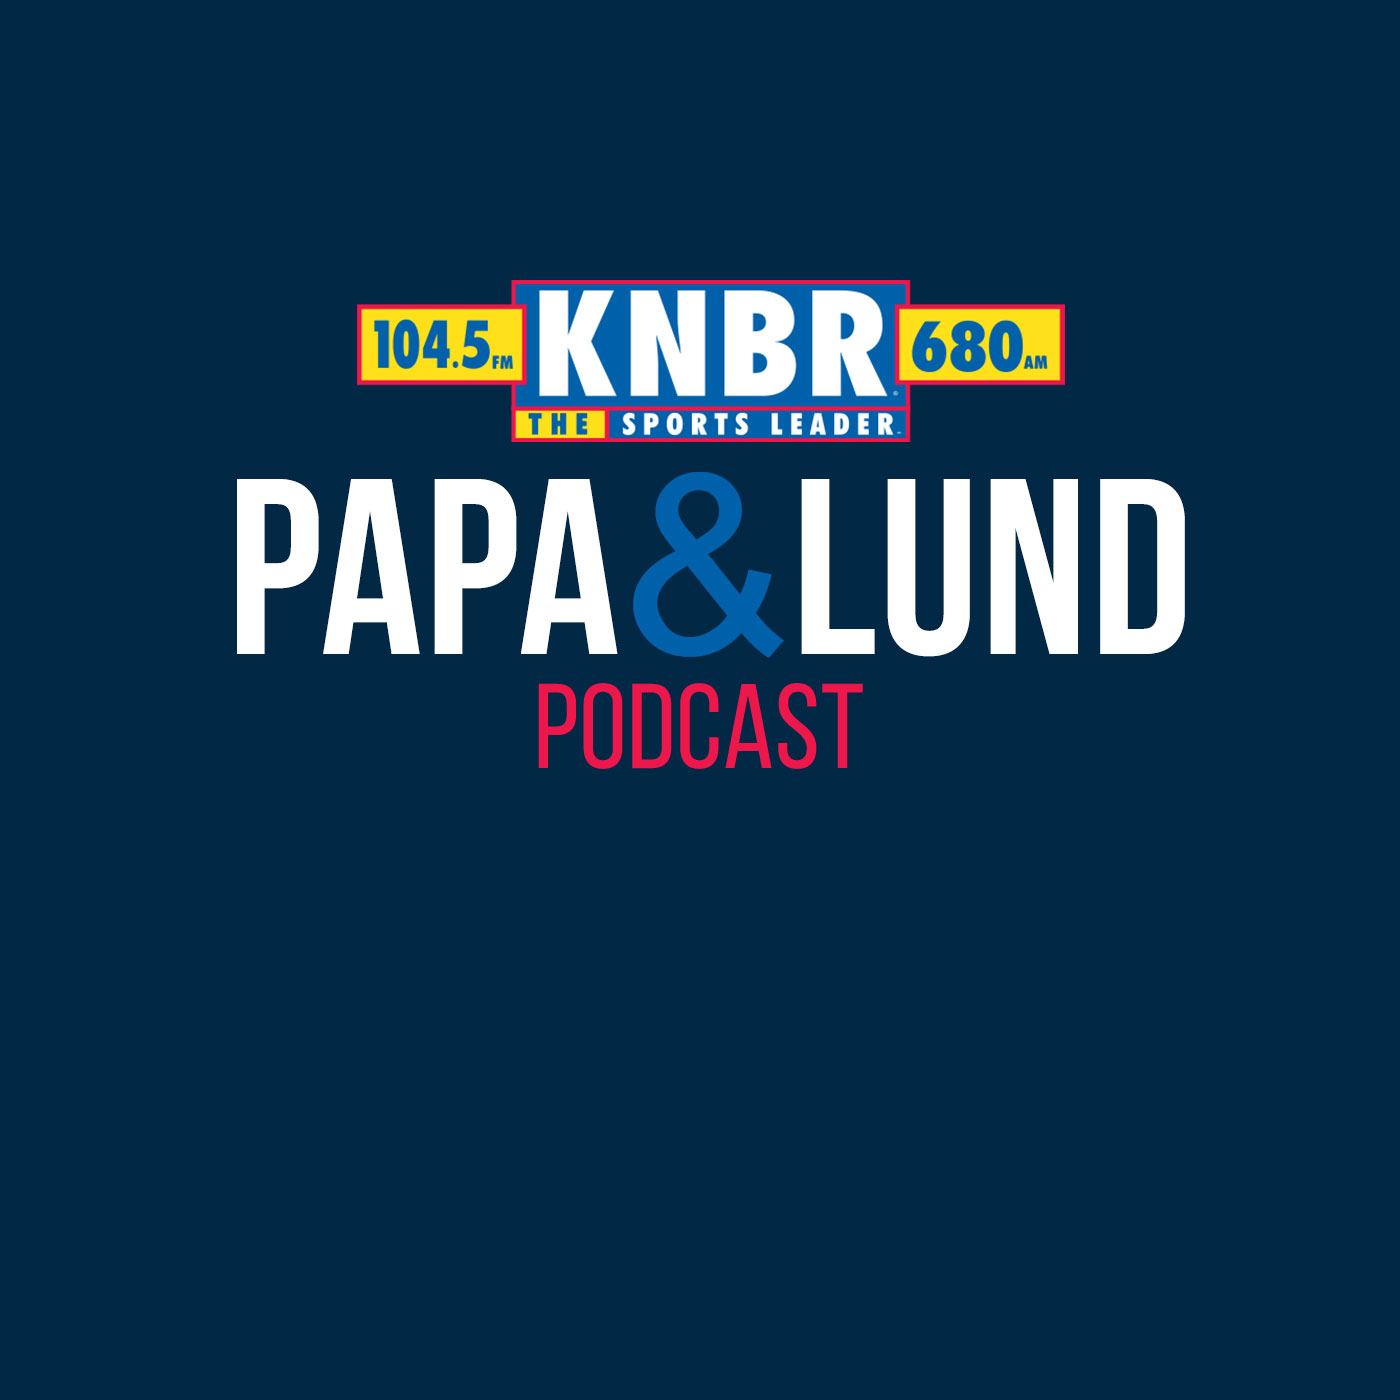 11-6 Tim Kawakami joins Papa & Lund to discuss the 49ers splash at the Trade Deadline as well as what the Giants will look to add with Free Agency starting up